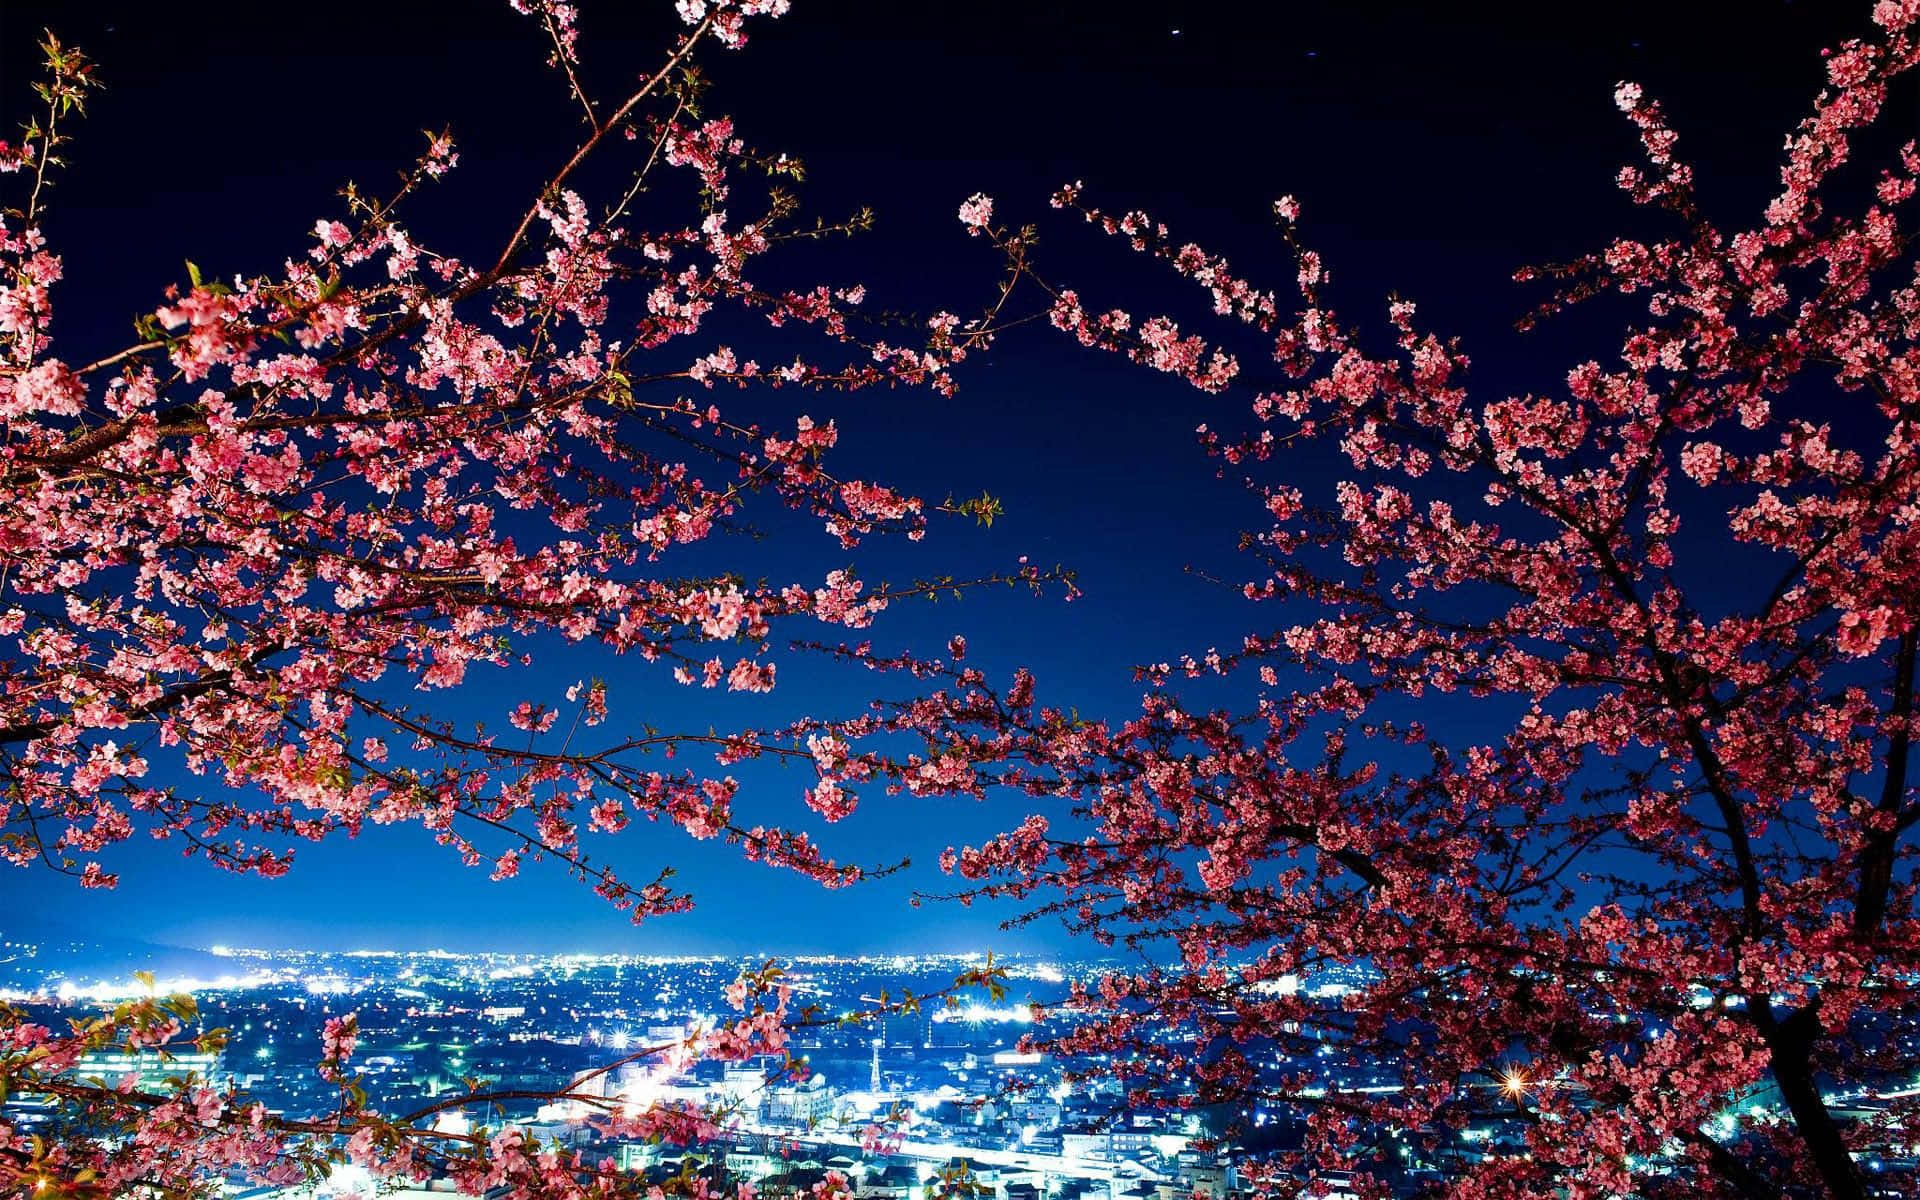 Discover the beauty of Tokyo at Night